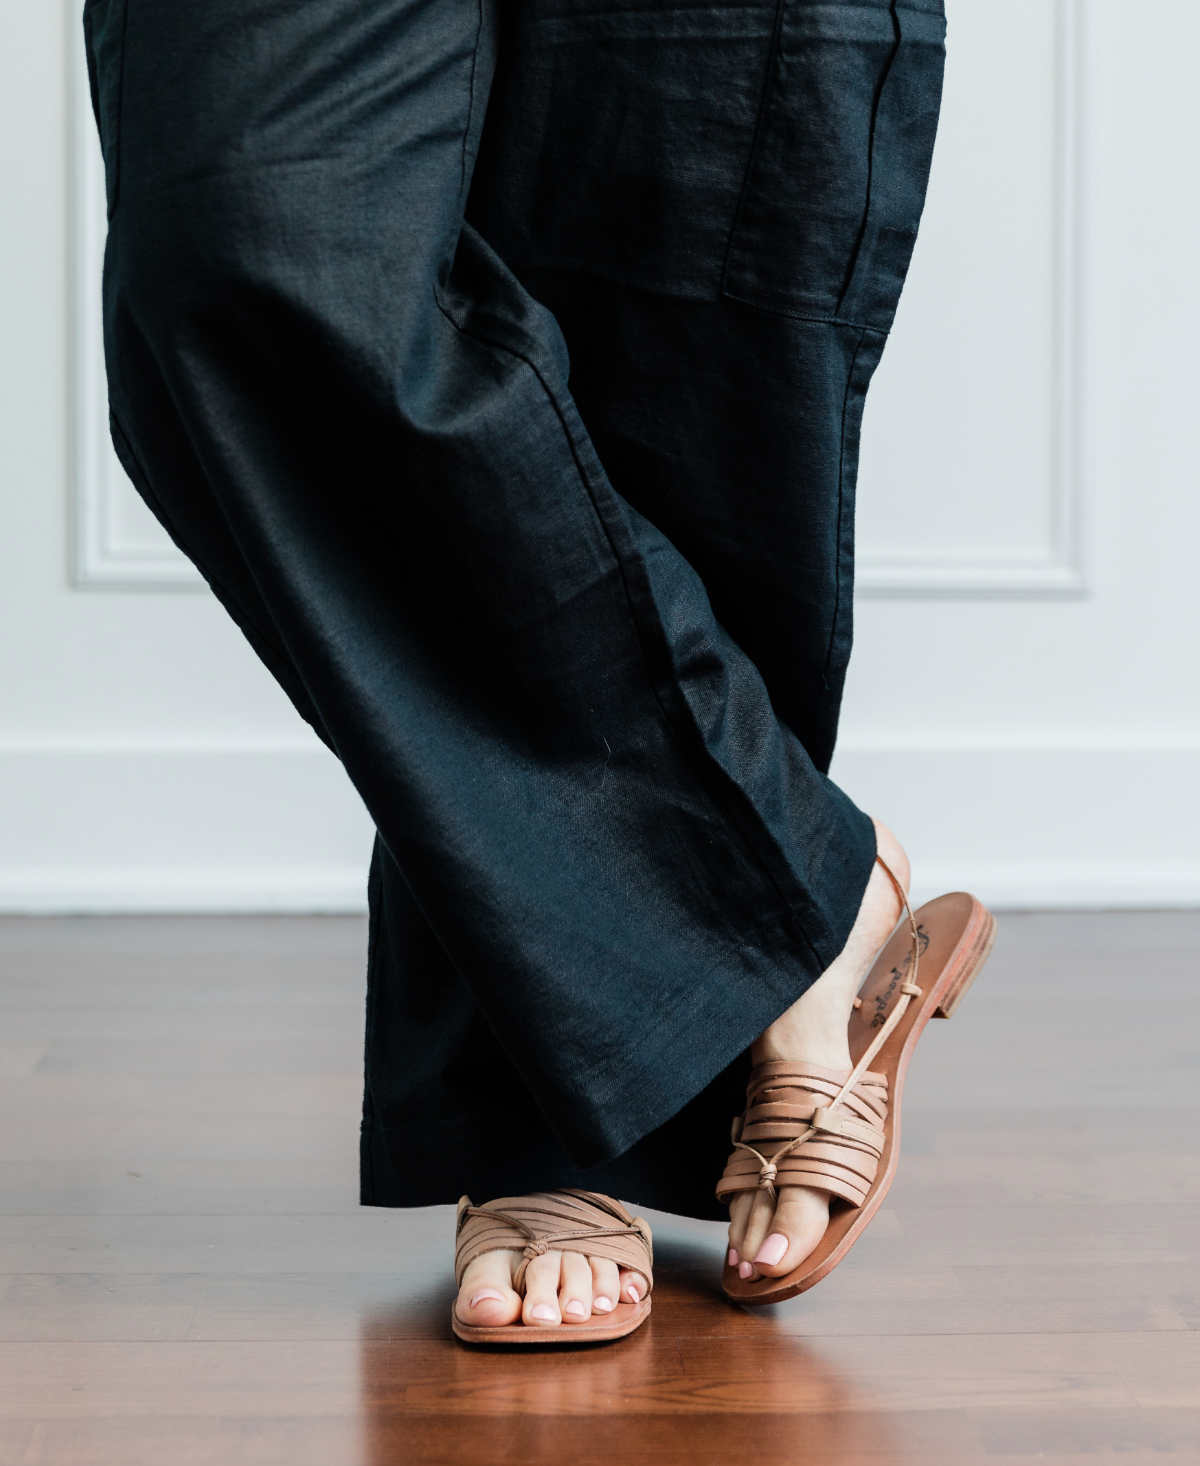 Cropped view of woman's legs wearing beige strappy sandals with full length wide leg black linen pants.